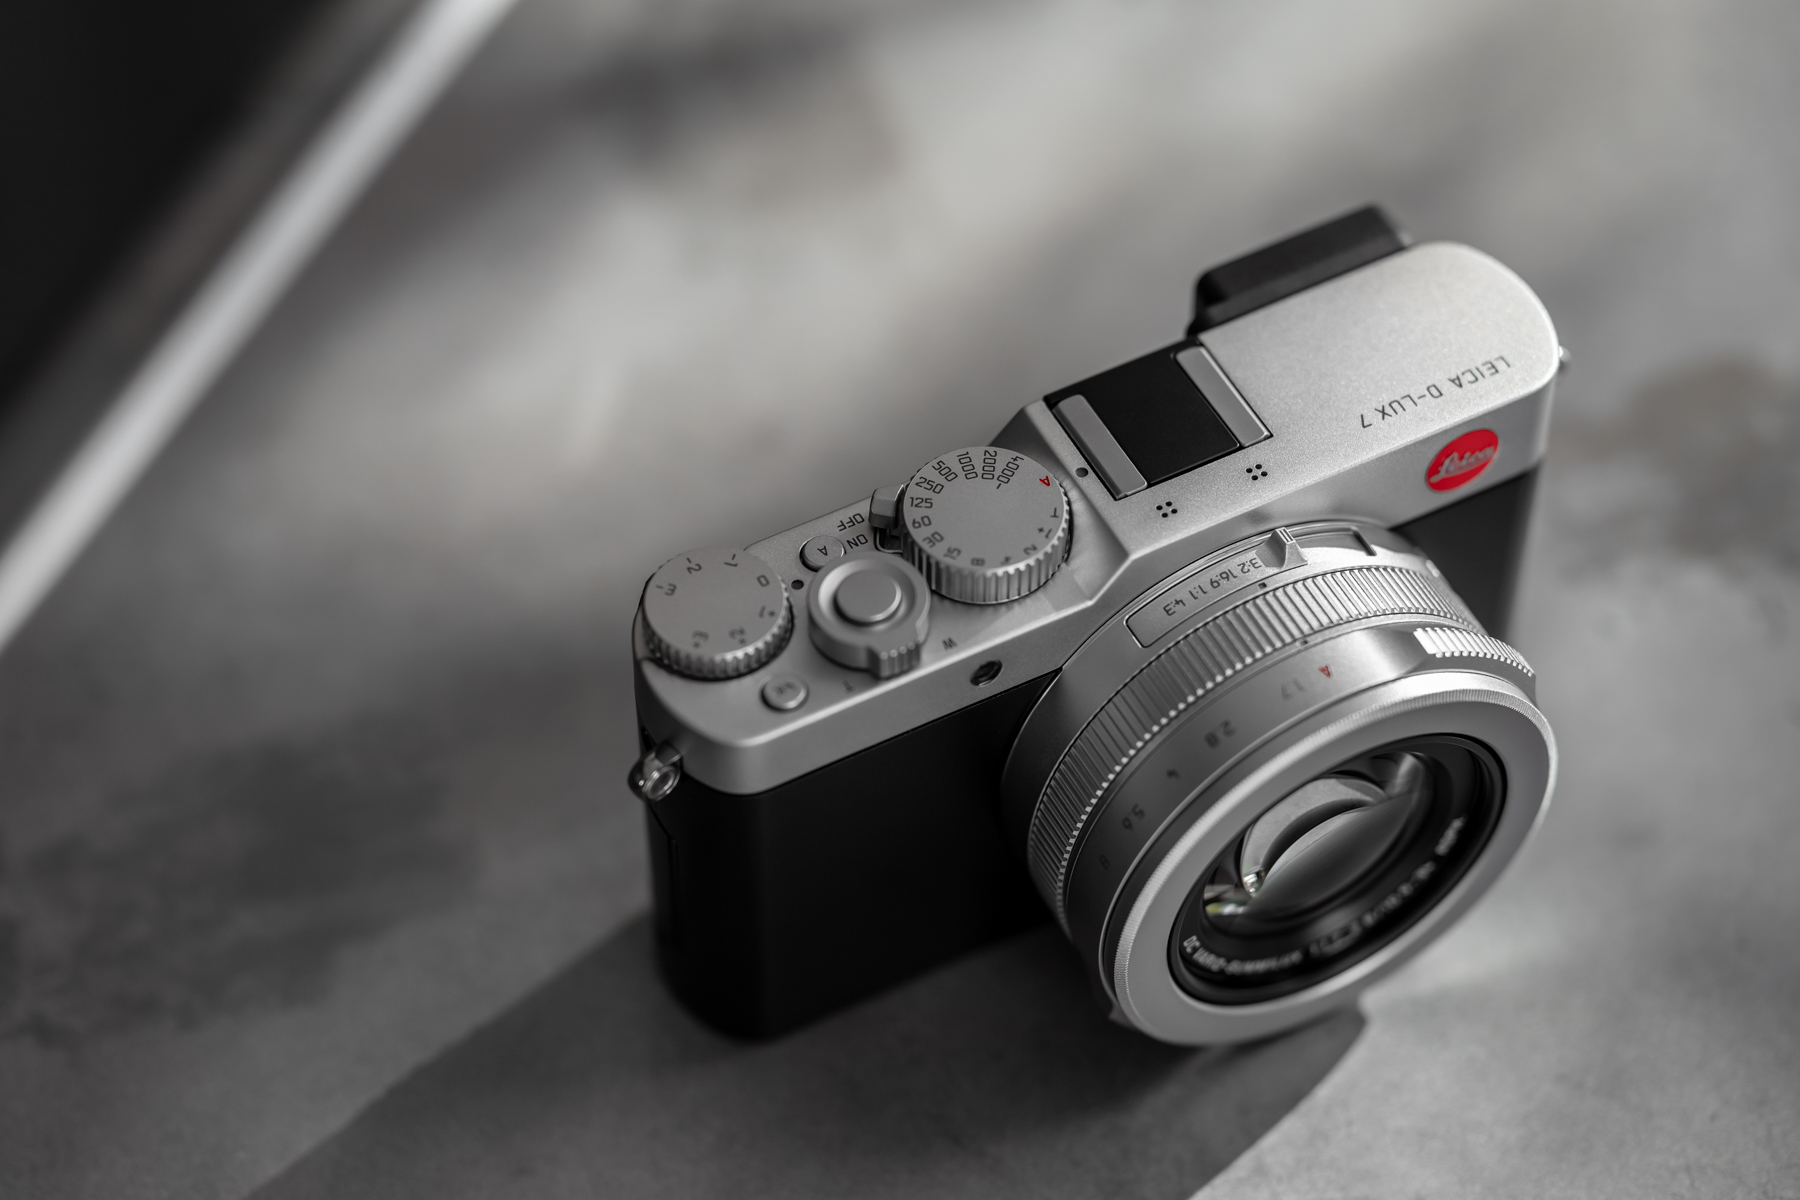 Leica Announces the D-Lux 7 Compact Camera